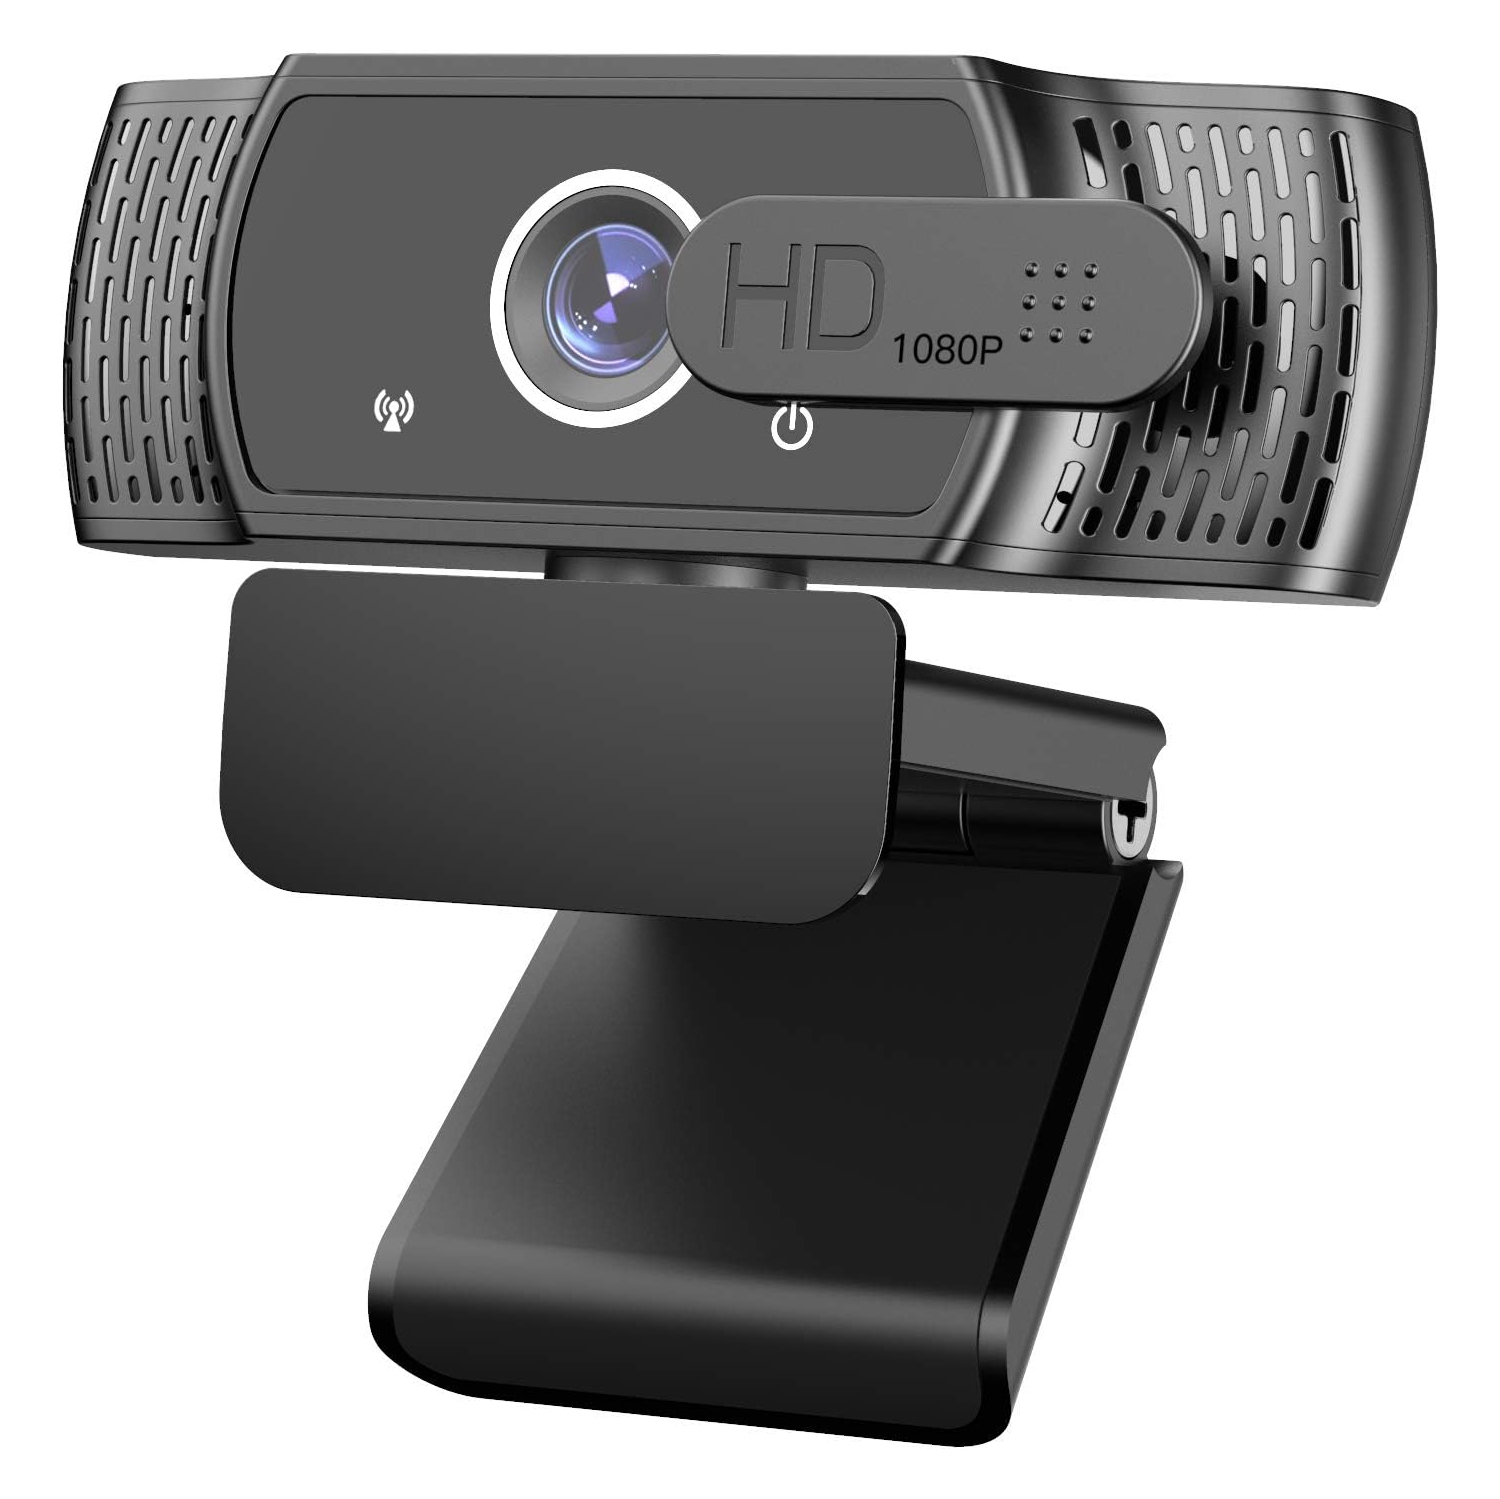 Usb 1080p Hd Streaming Webcam With Microphone, With Privacy Cover, Plug And Play, Autofocus Flexible Rotatable Wide